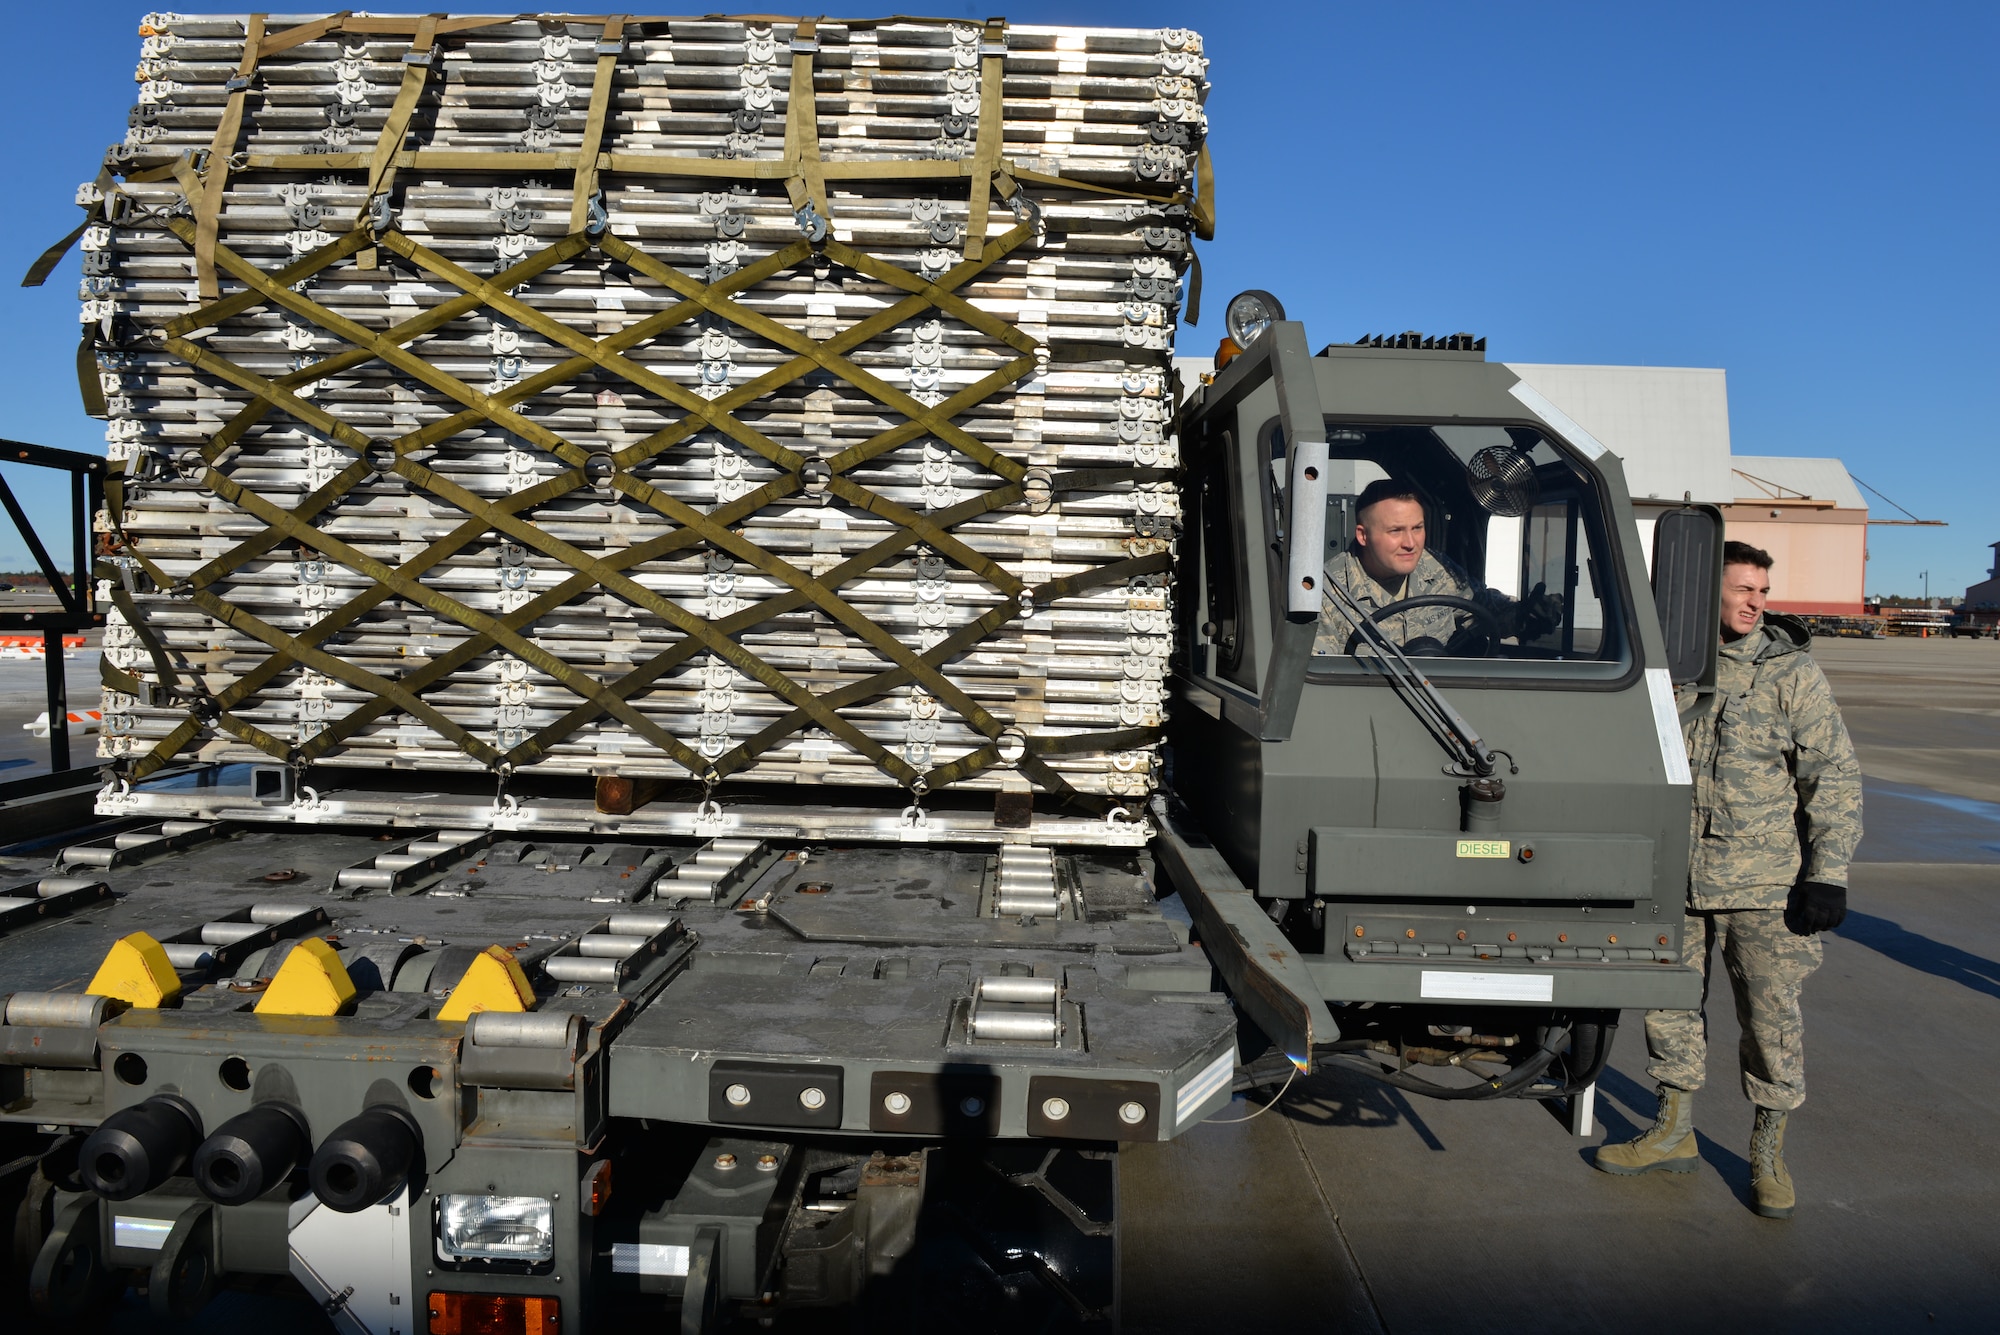 Senior Airman Andrew Poole and Airman 1st Class Hugh McMackin prepare to load a pallet onto the new pallet racking system using a Halvorsen 25K loader, Nov. 7, 2018, at Pease Air National Guard Base, N.H.(Photo by Master Sgt. Thomas Johnson, 157th ARW Public Affairs)